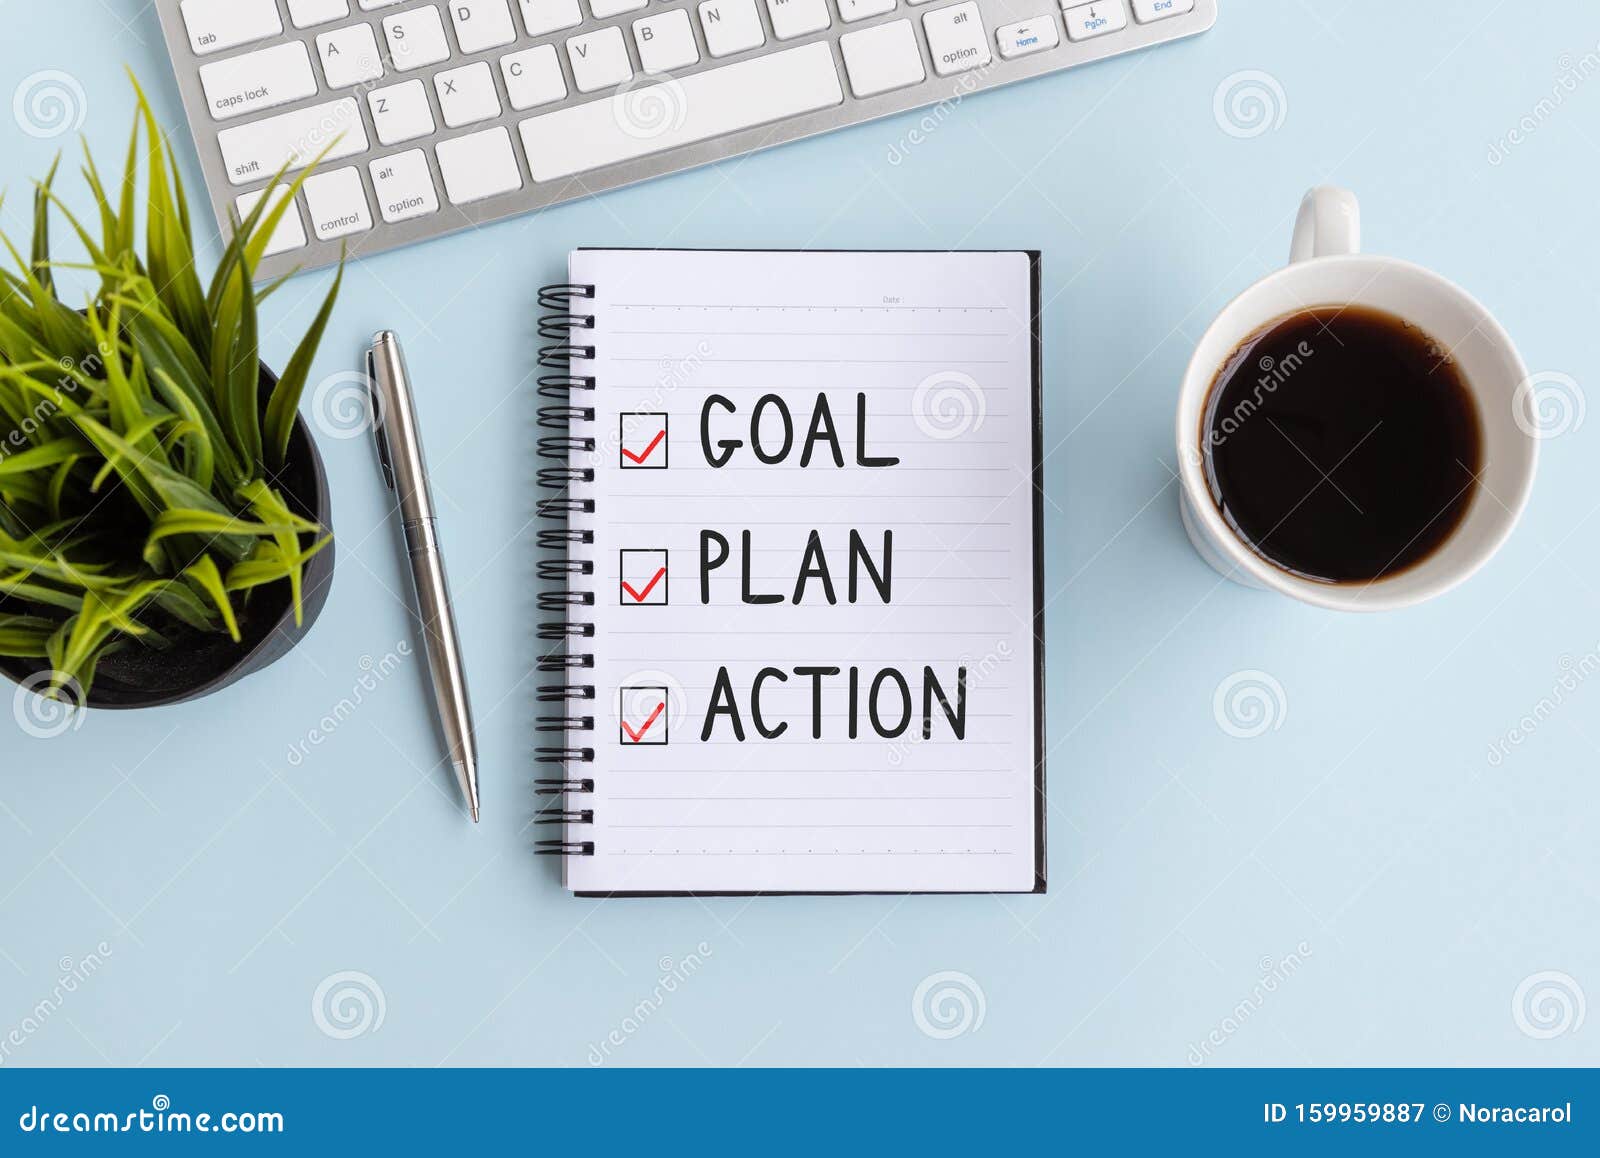 text goal, plan and action on notepad